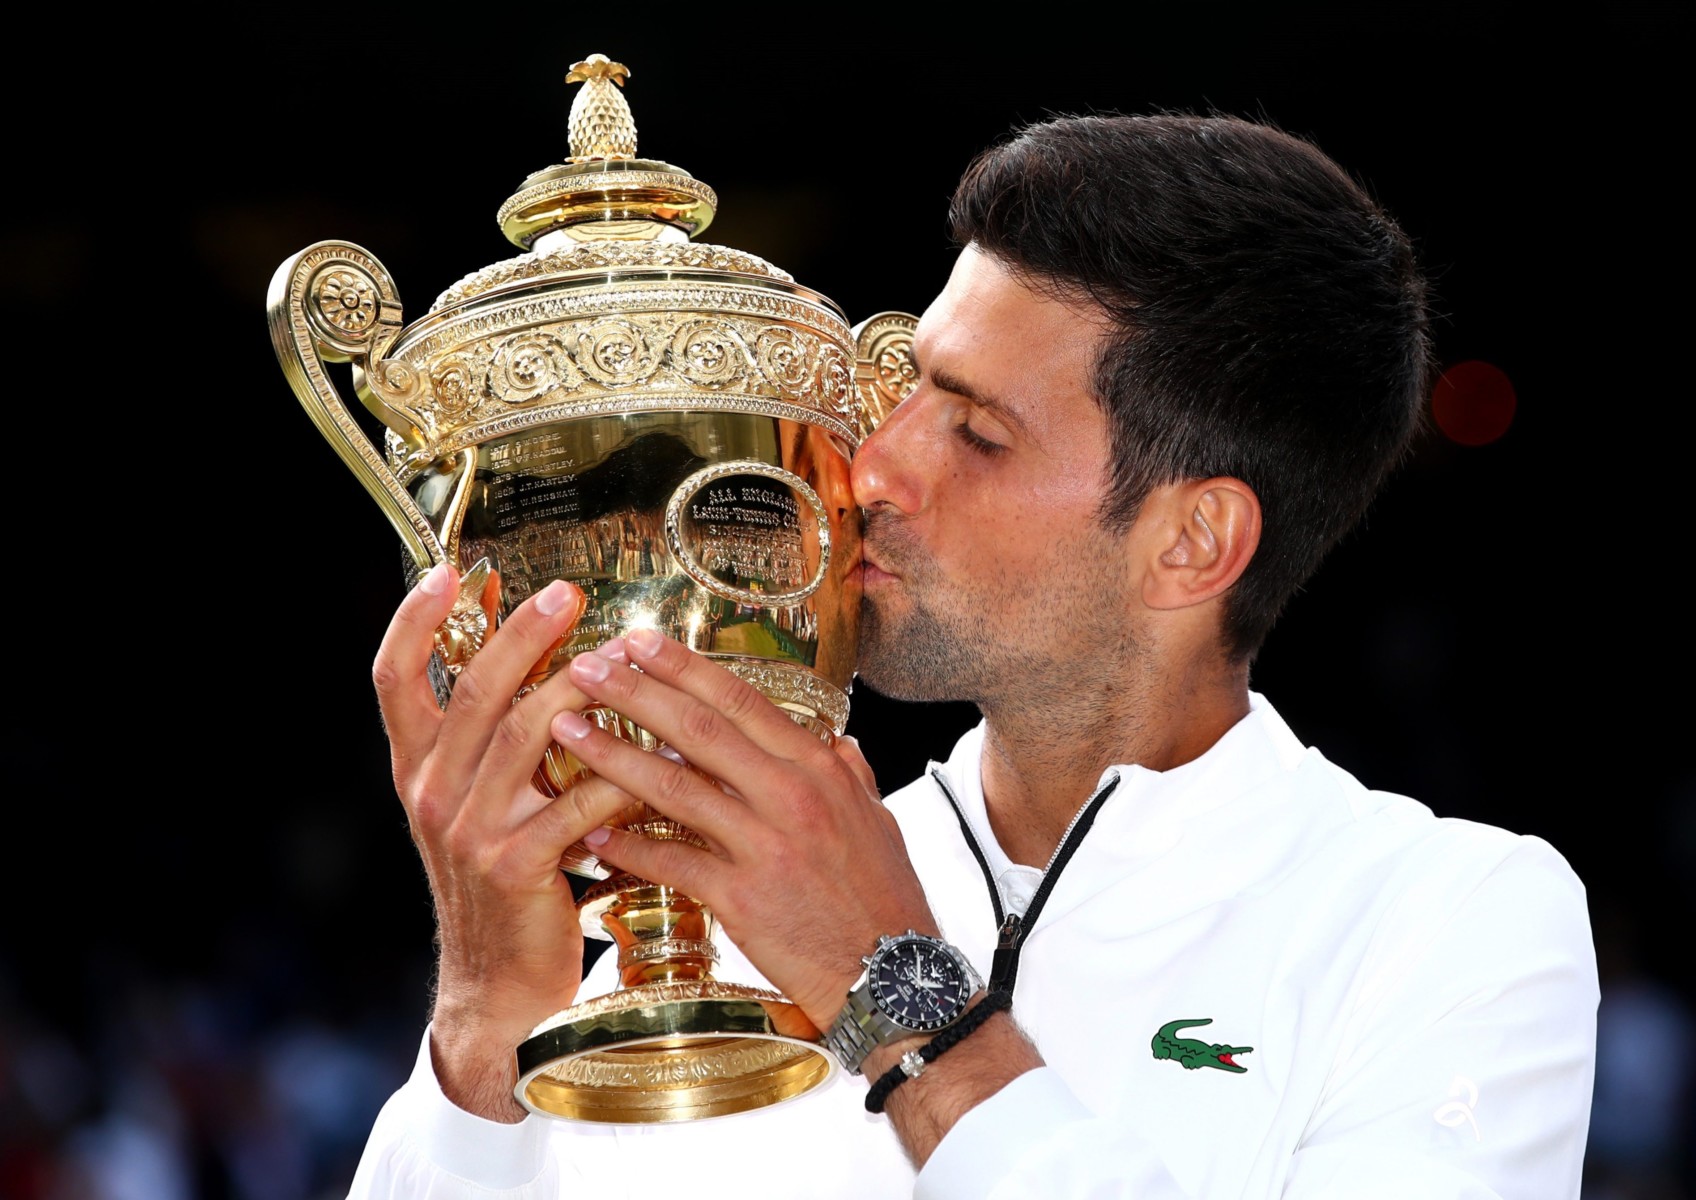 The Serb is the defending champion at Wimbledon but will not be able to defend his title in 2020